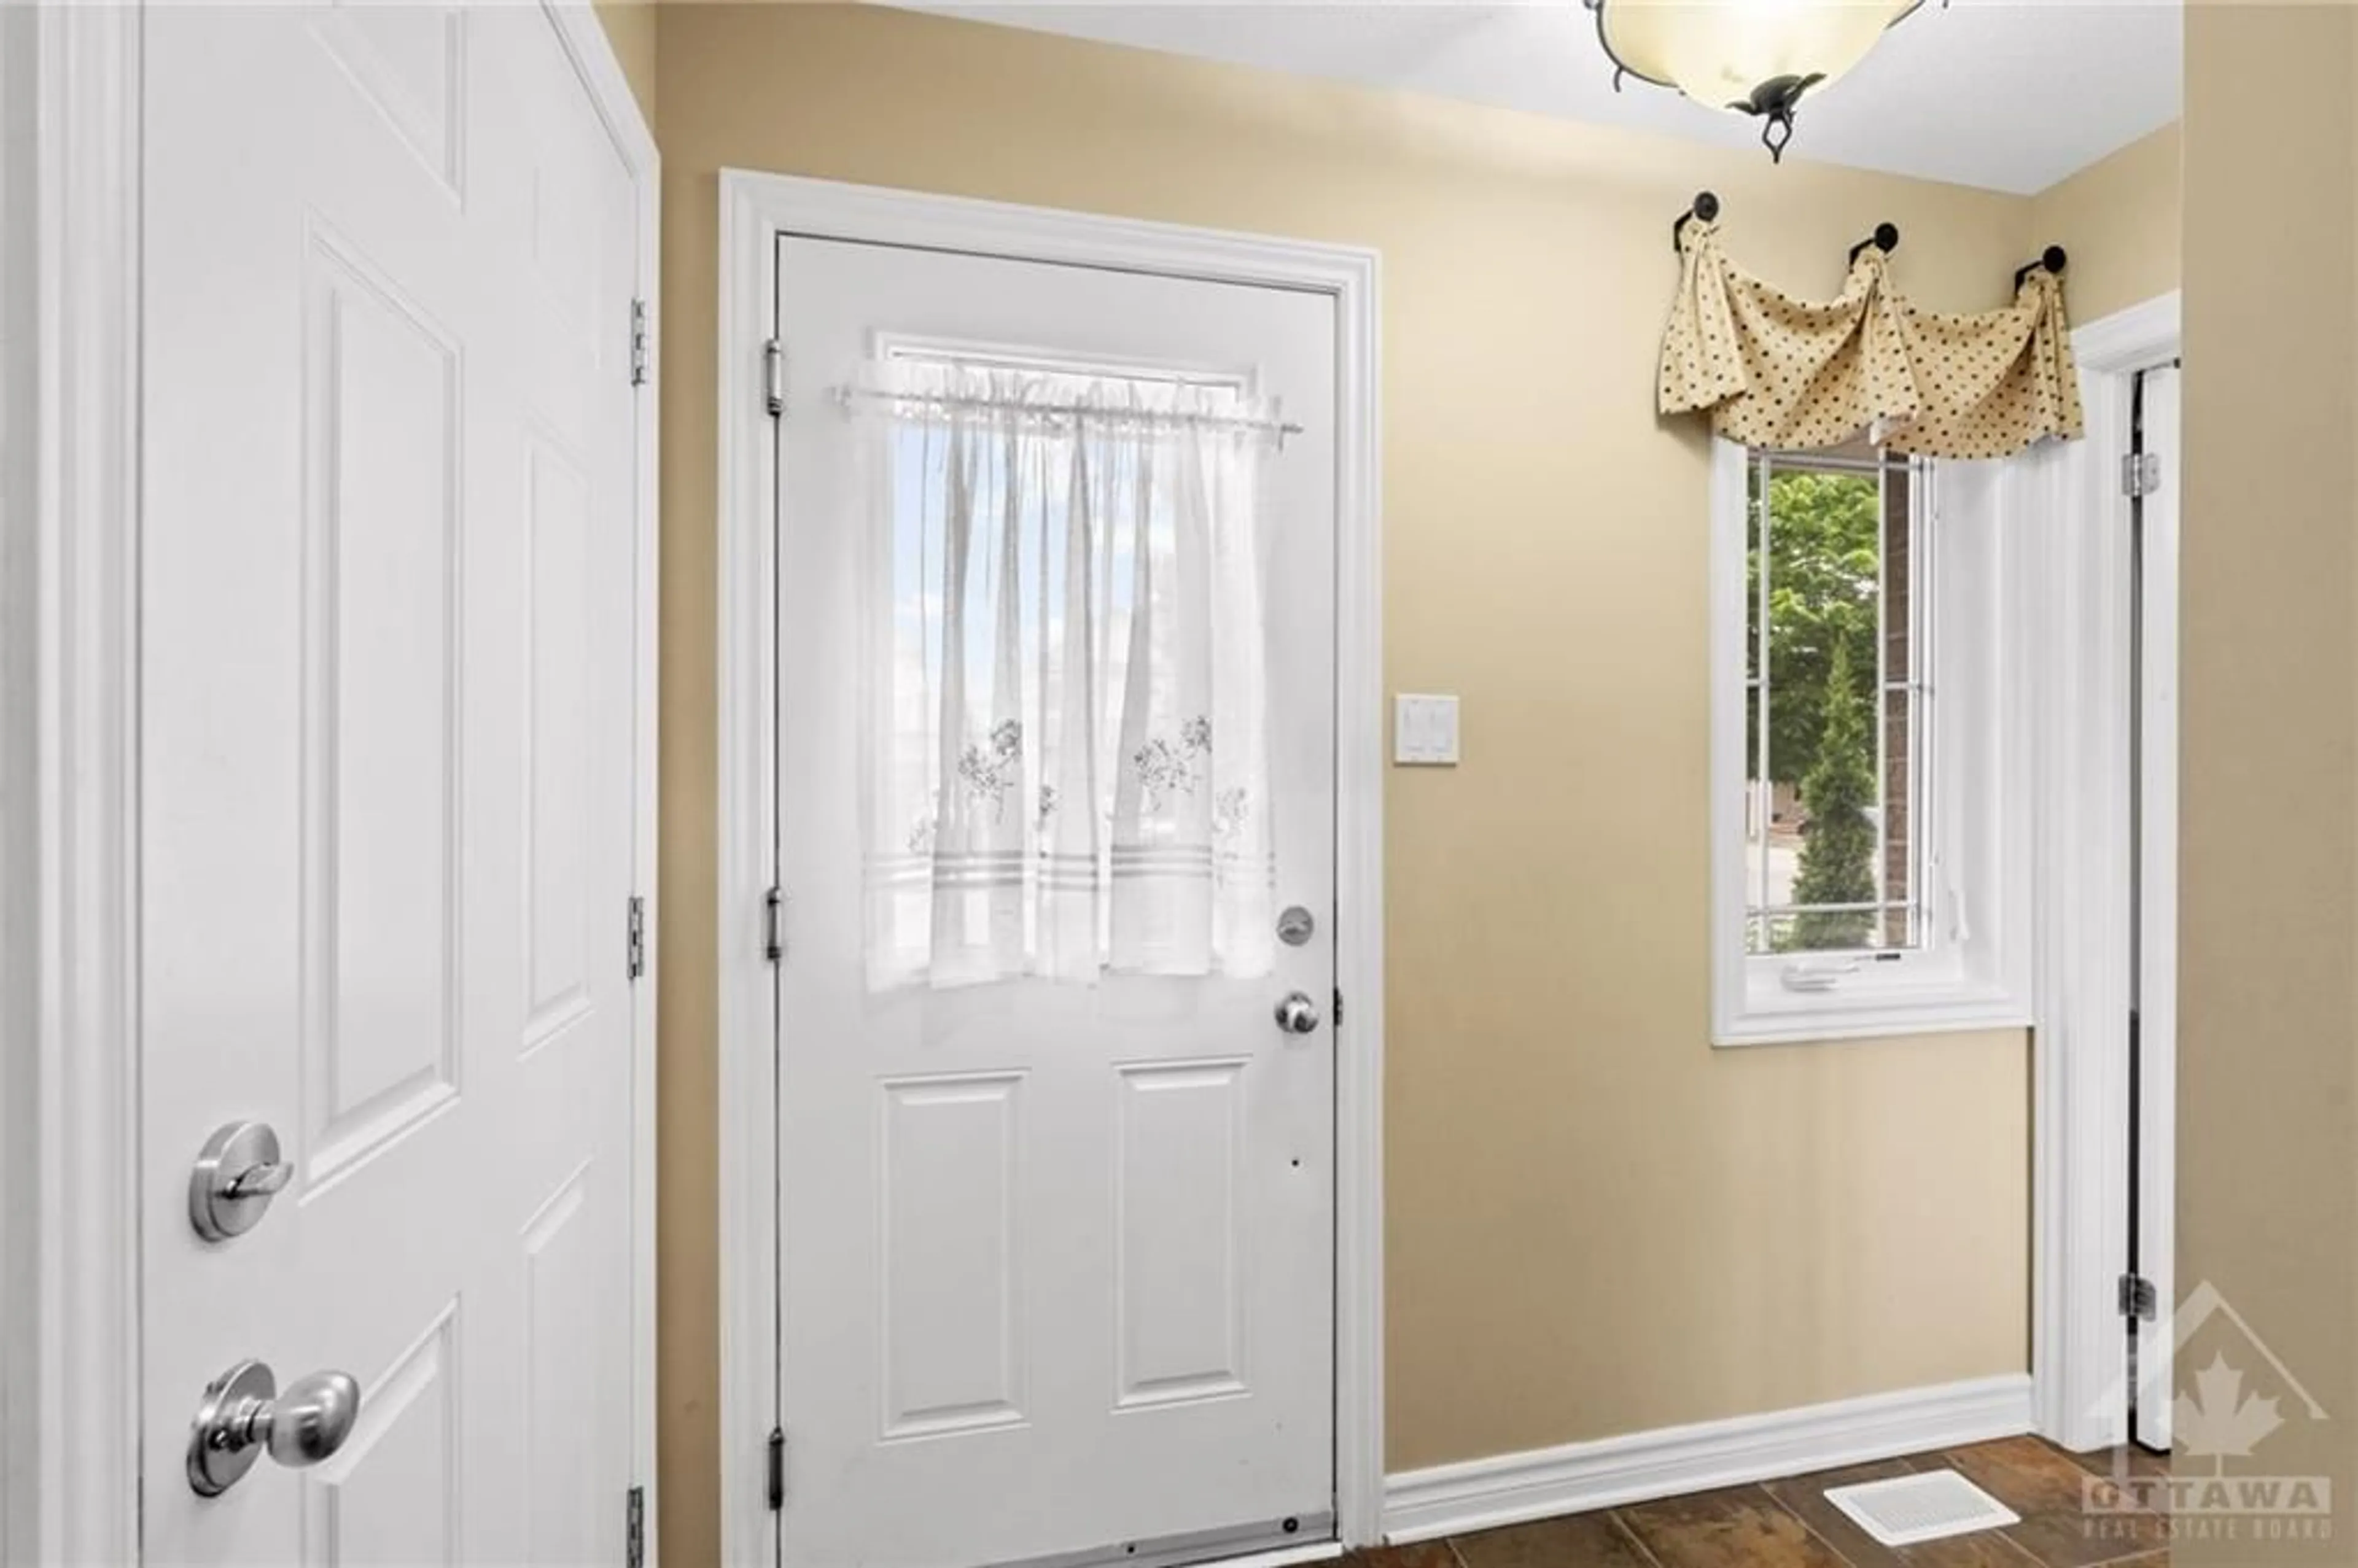 Indoor entryway for 807 CLEARBROOK Dr, Ottawa Ontario K2J 0B9